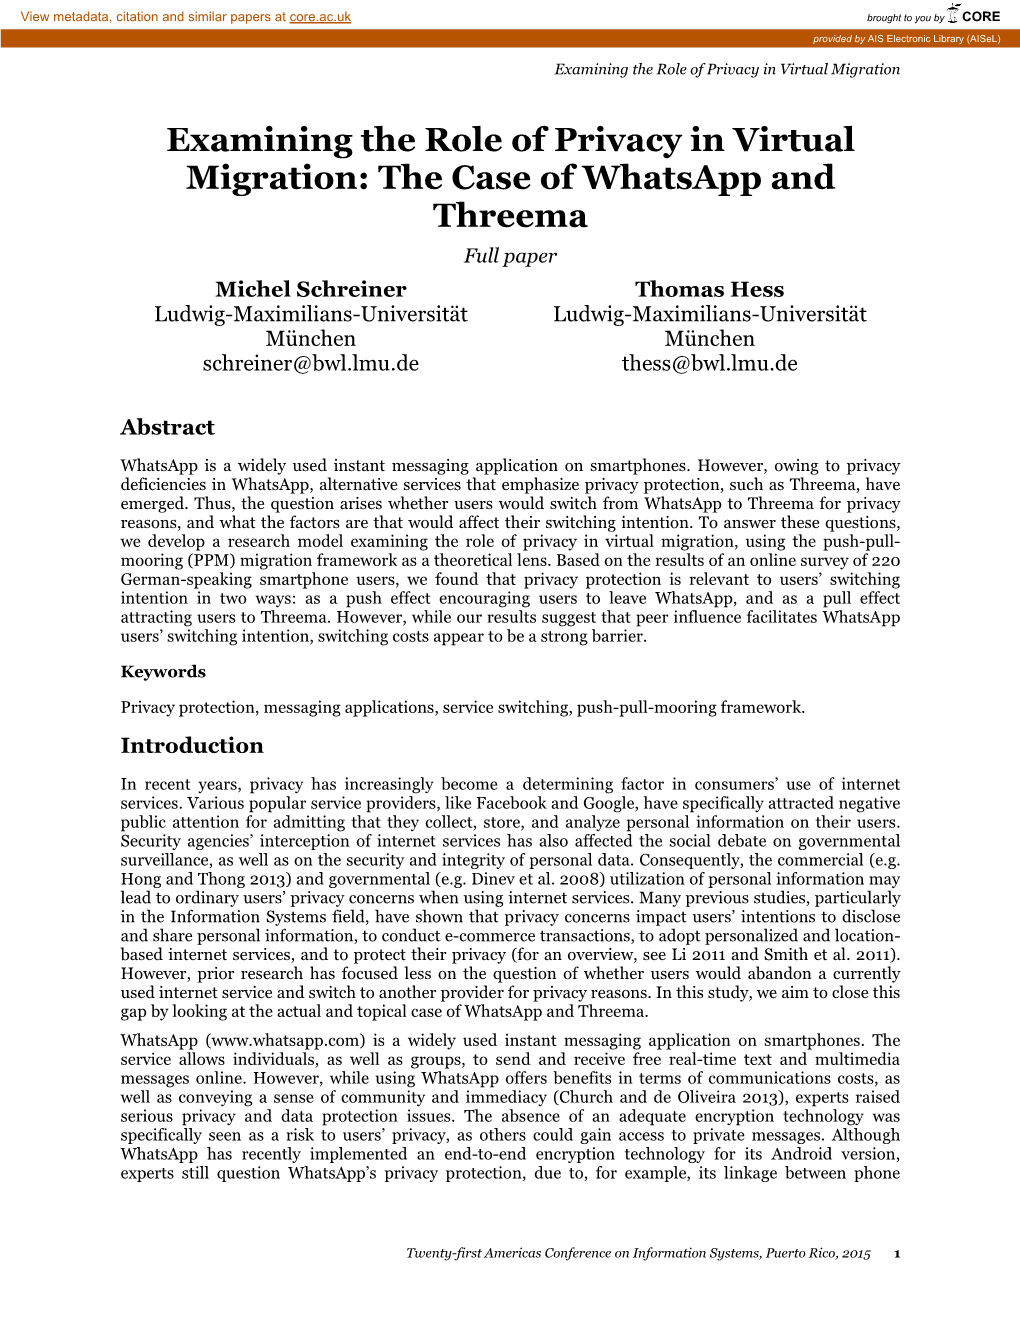 Examining the Role of Privacy in Virtual Migration